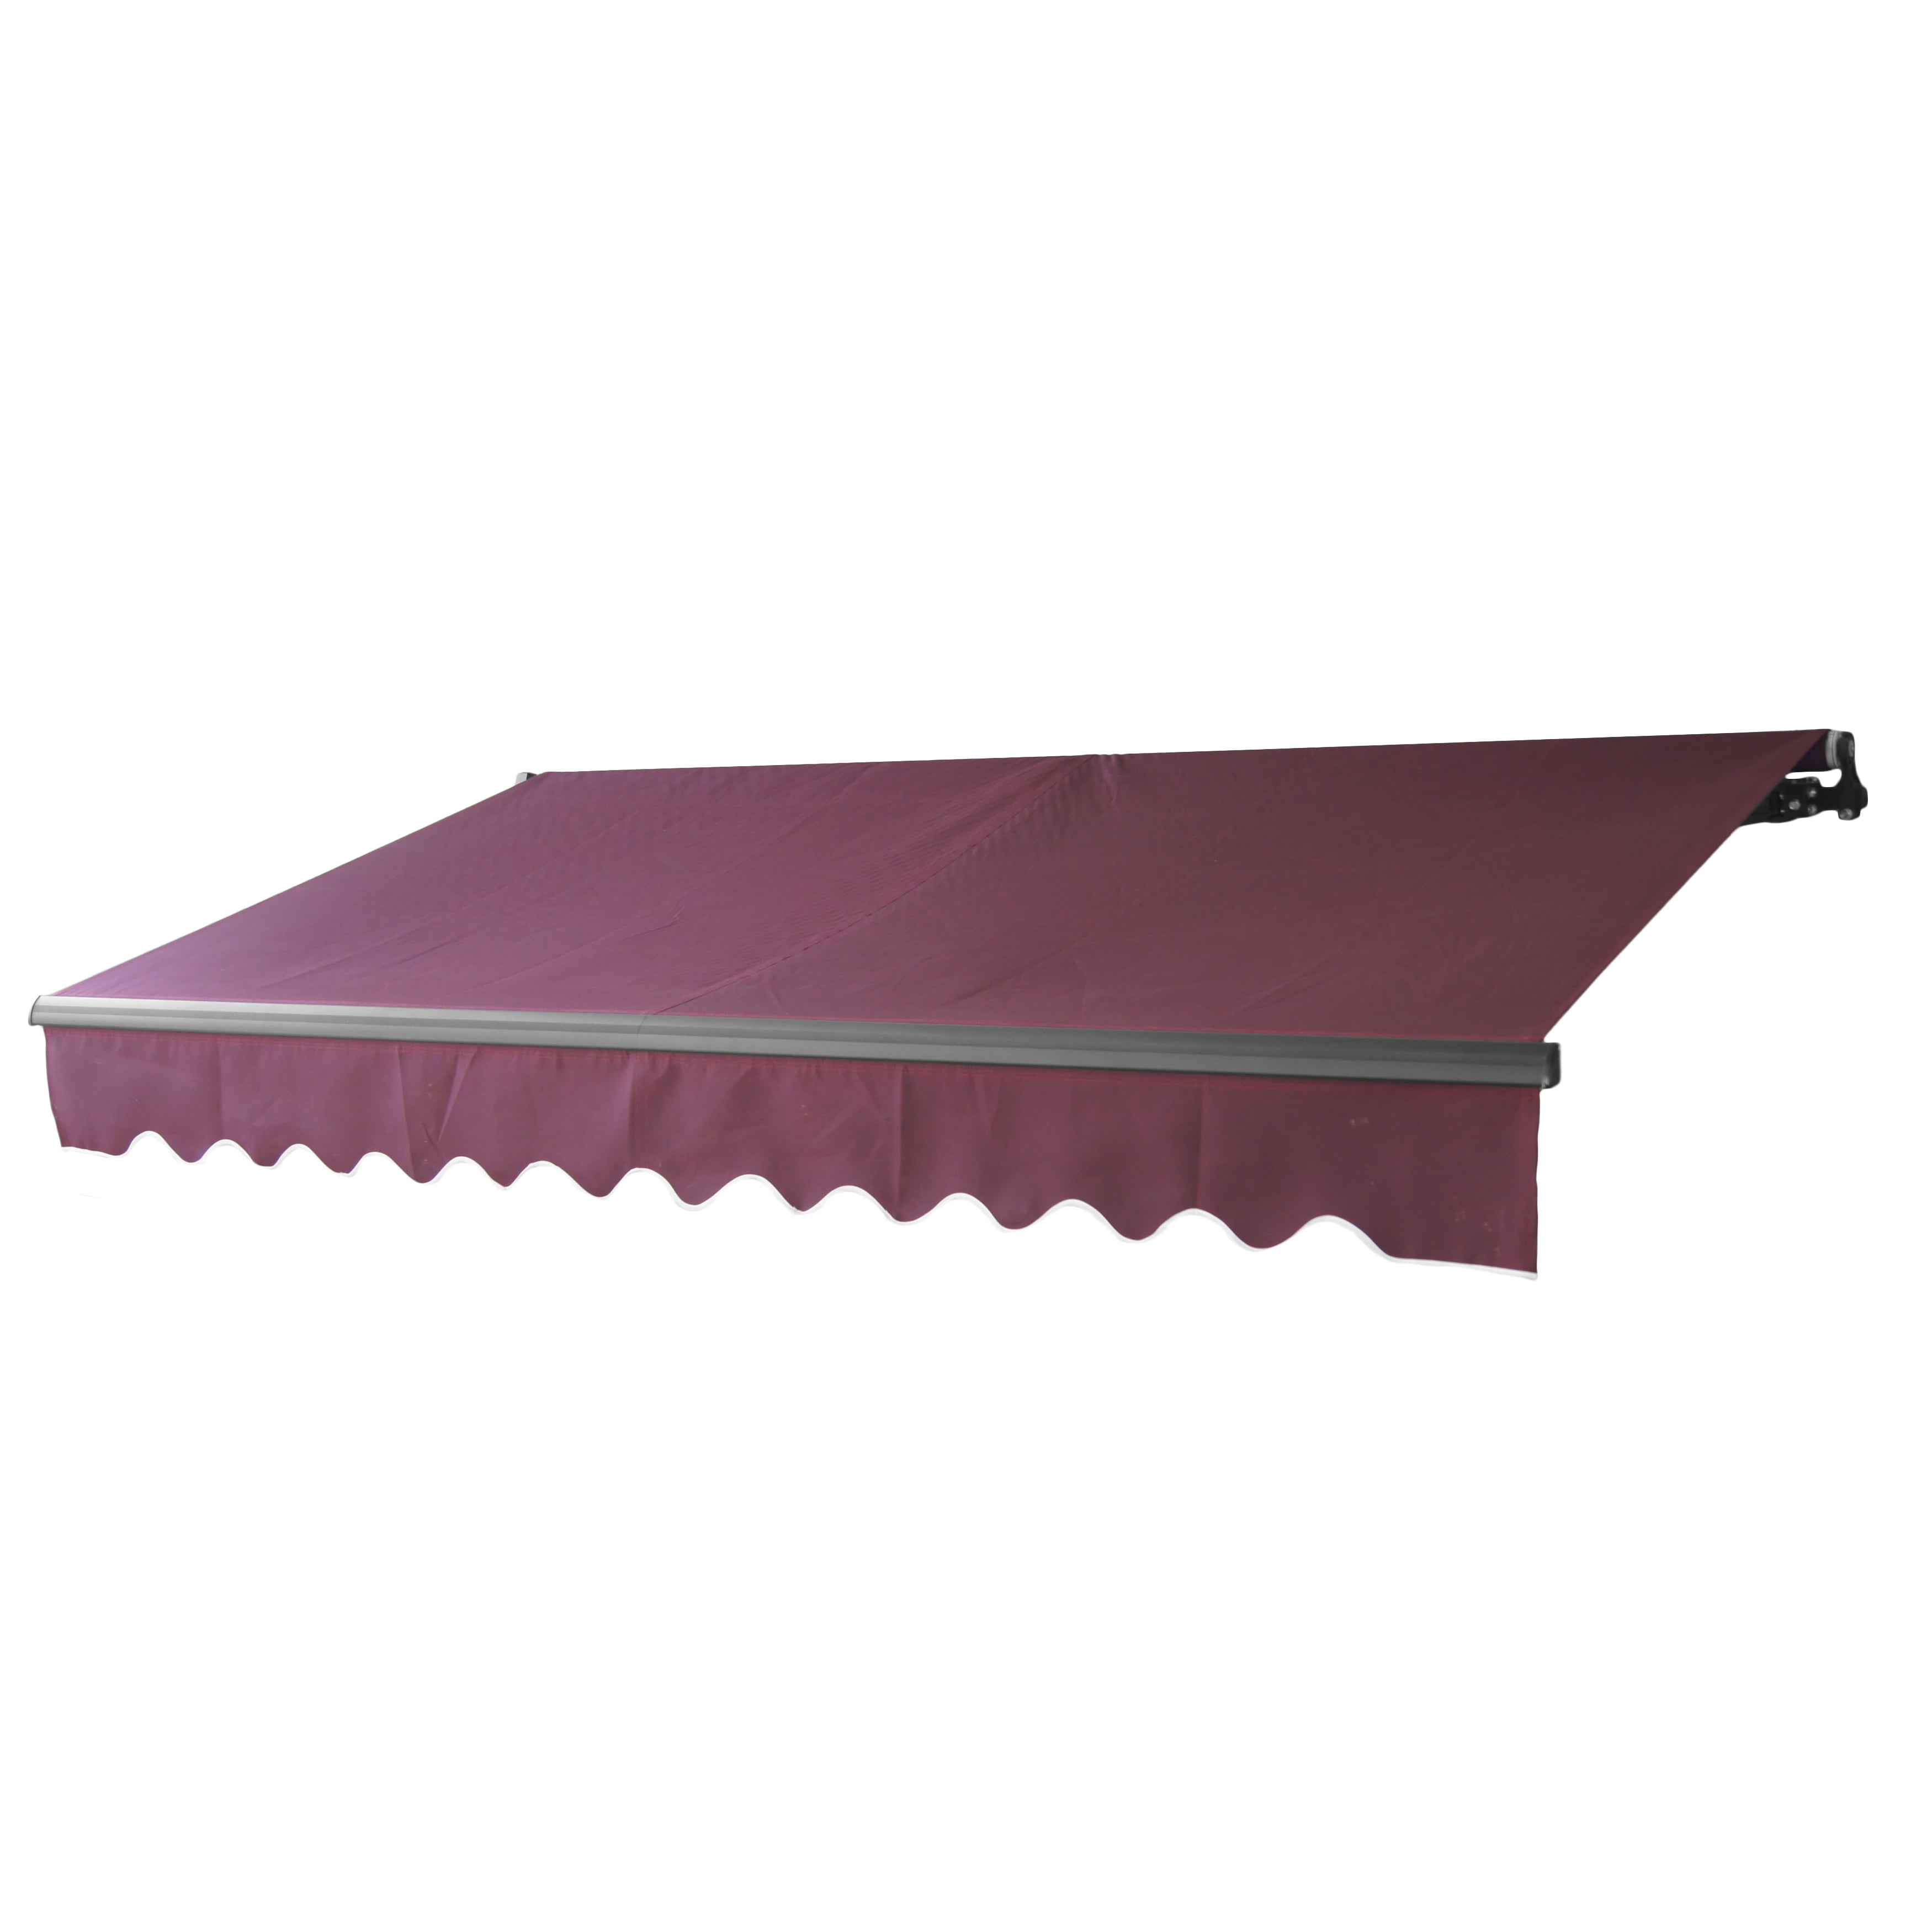 Ab13x10burg37 13 X 10 Ft. Black Frame Retractable Home Patio Canopy Awning, Burgundy